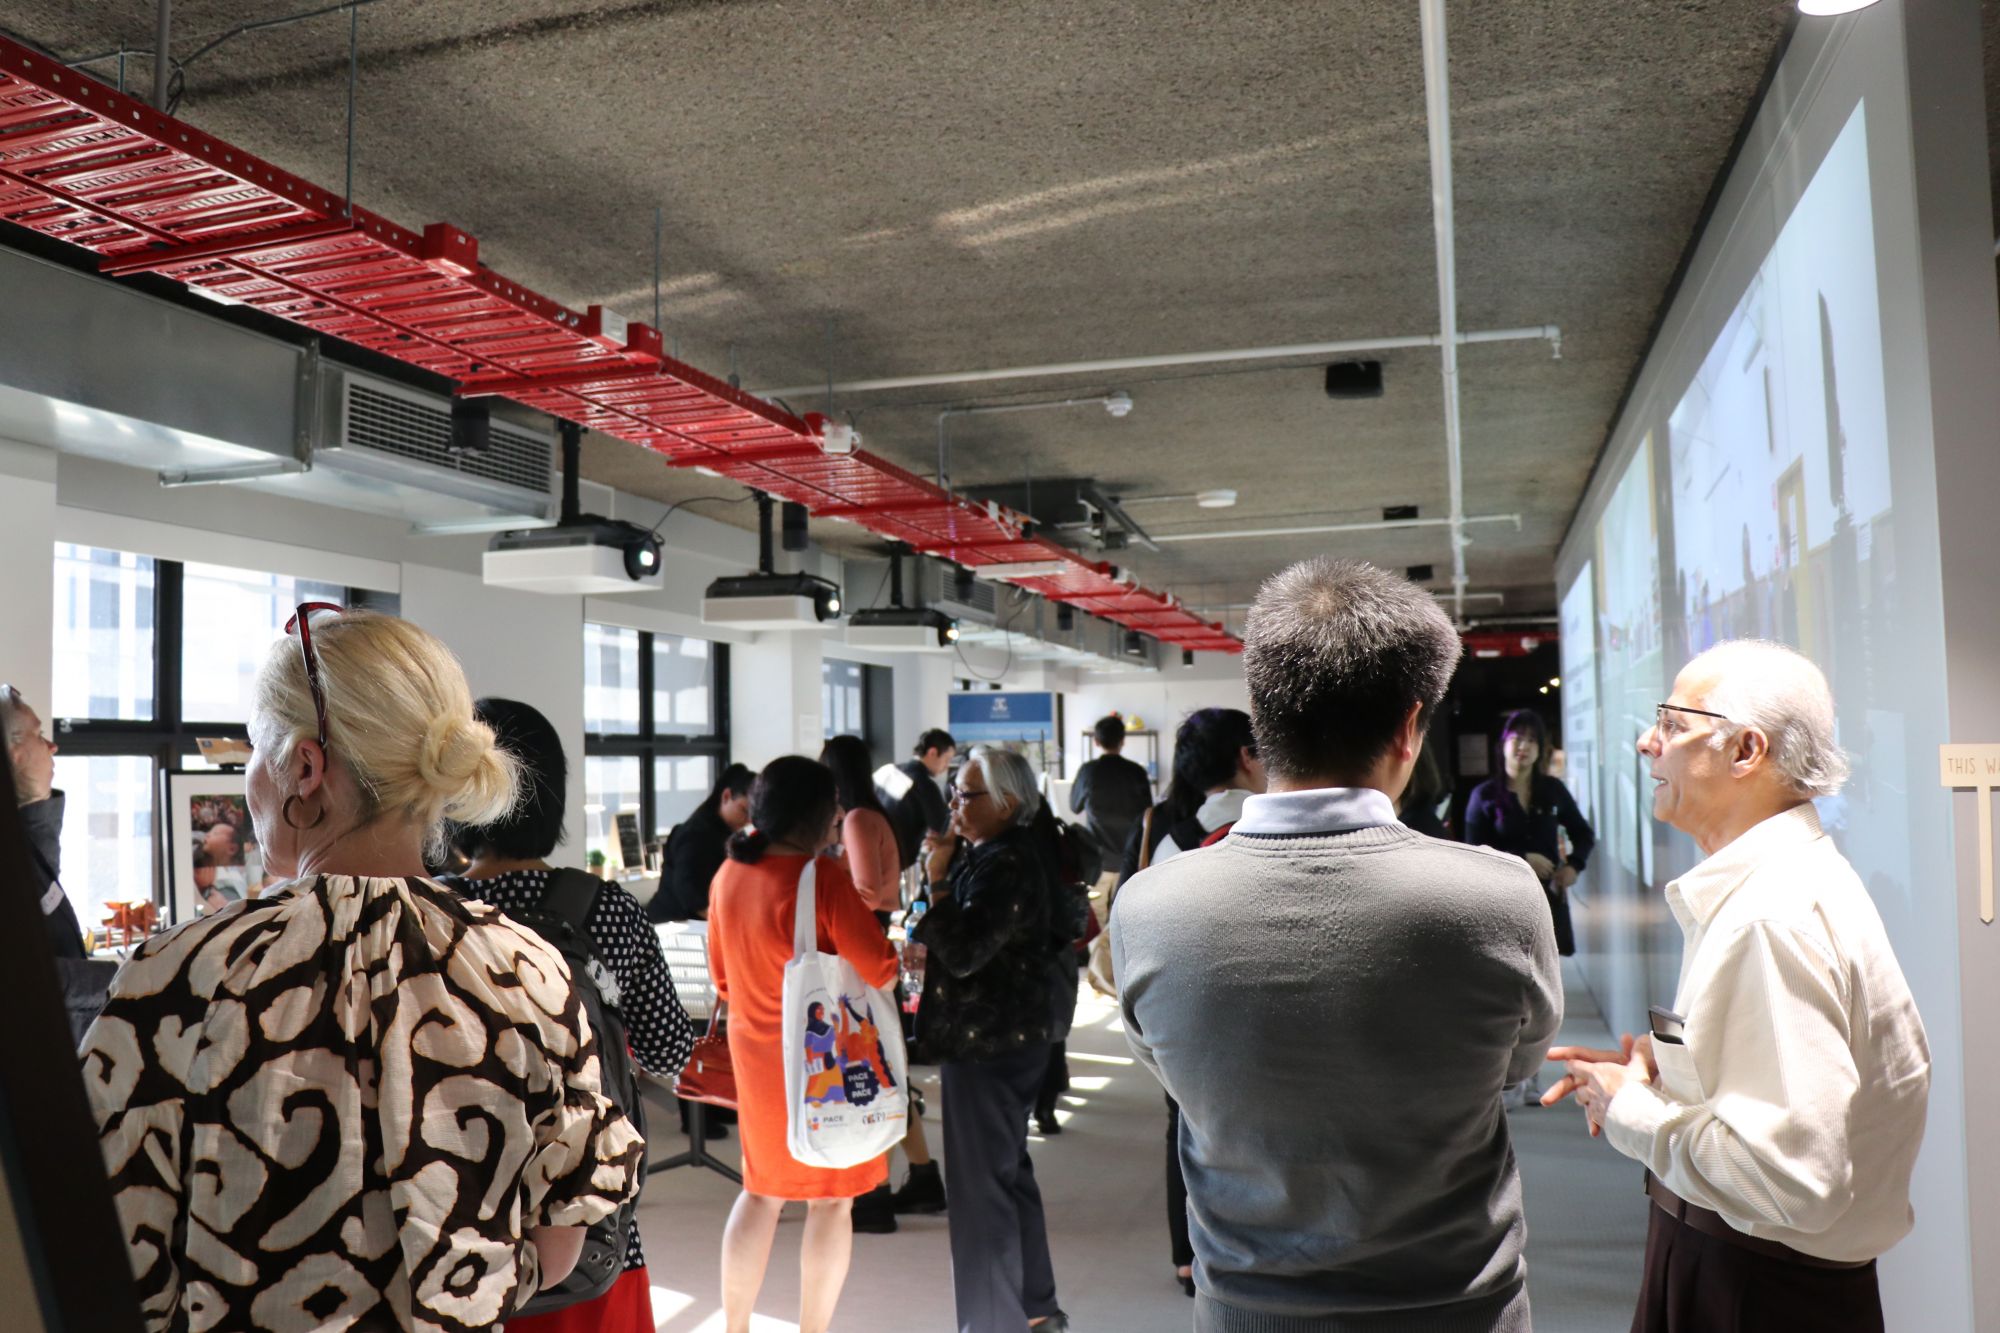 Guests gathered in the 3rd floor Digital Studio exhibition space to enjoying the artwork and discussions